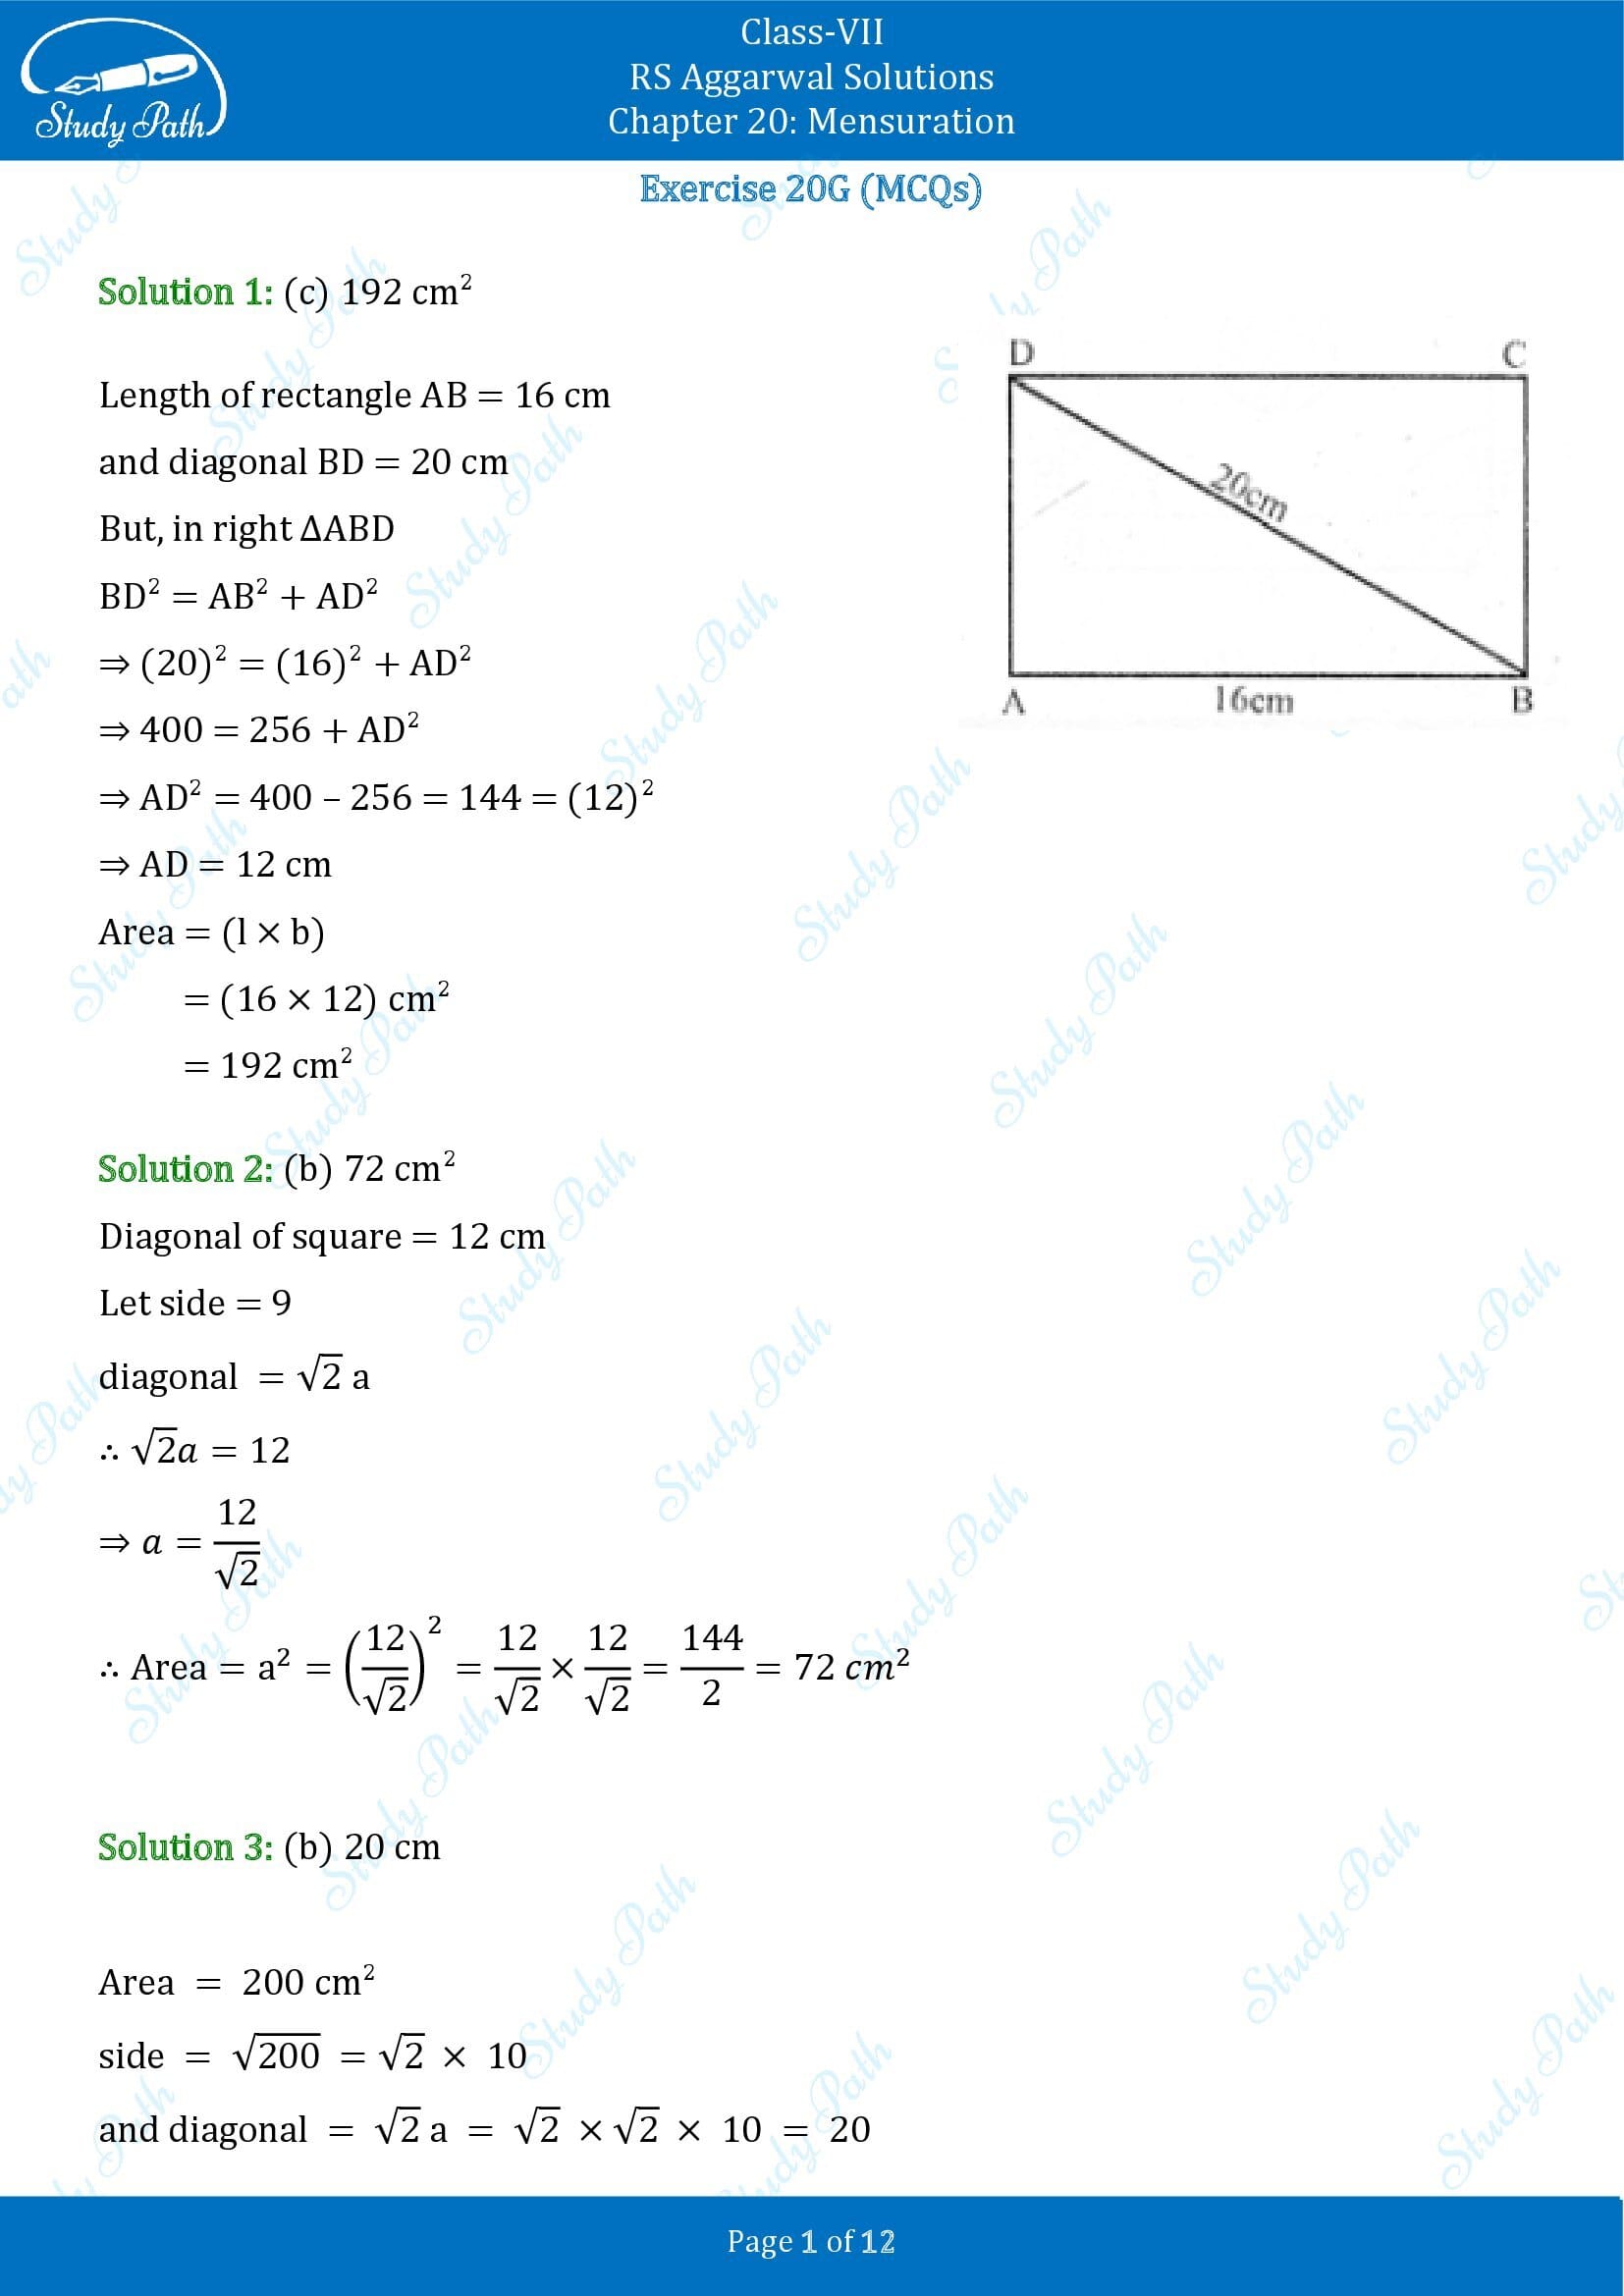 RS Aggarwal Solutions Class 7 Chapter 20 Mensuration Exercise 20G MCQ 00001